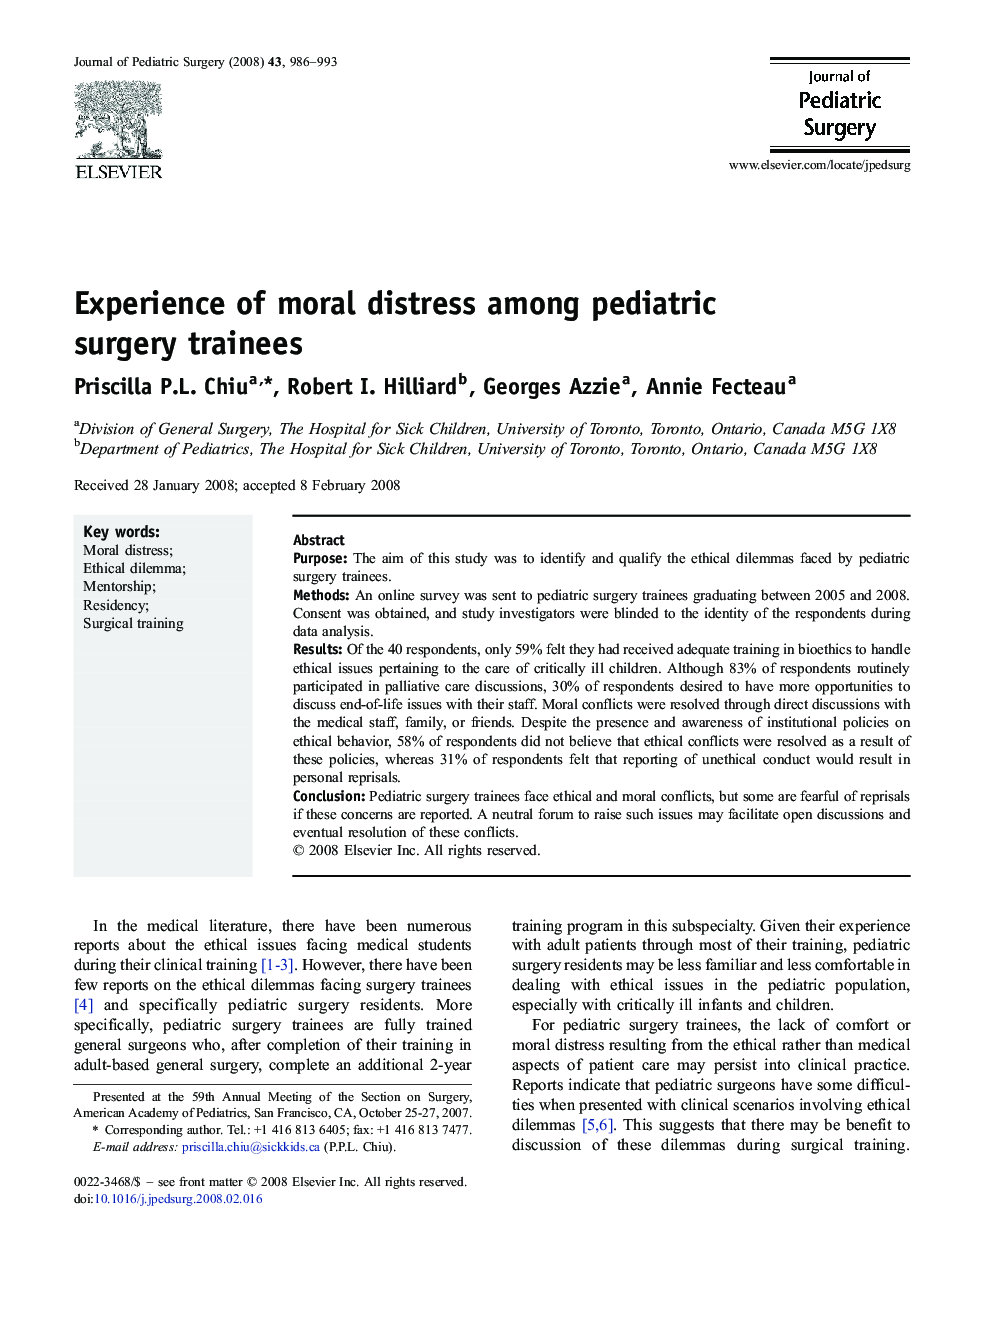 Experience of moral distress among pediatric surgery trainees 